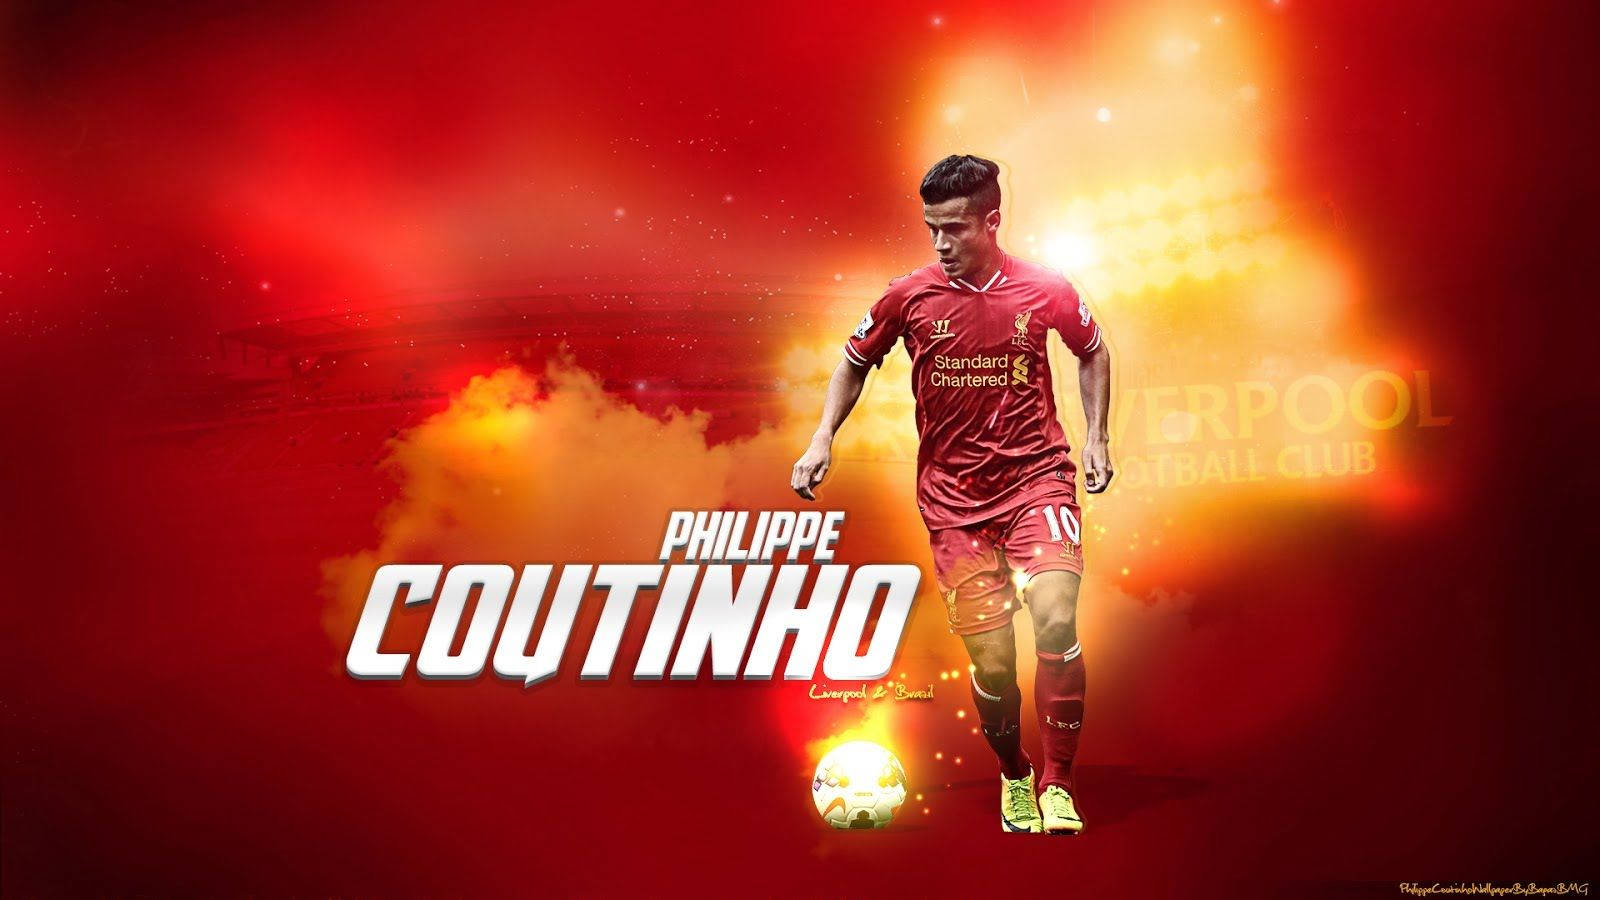 Liverpool Fc Player Philippe Coutinho Background